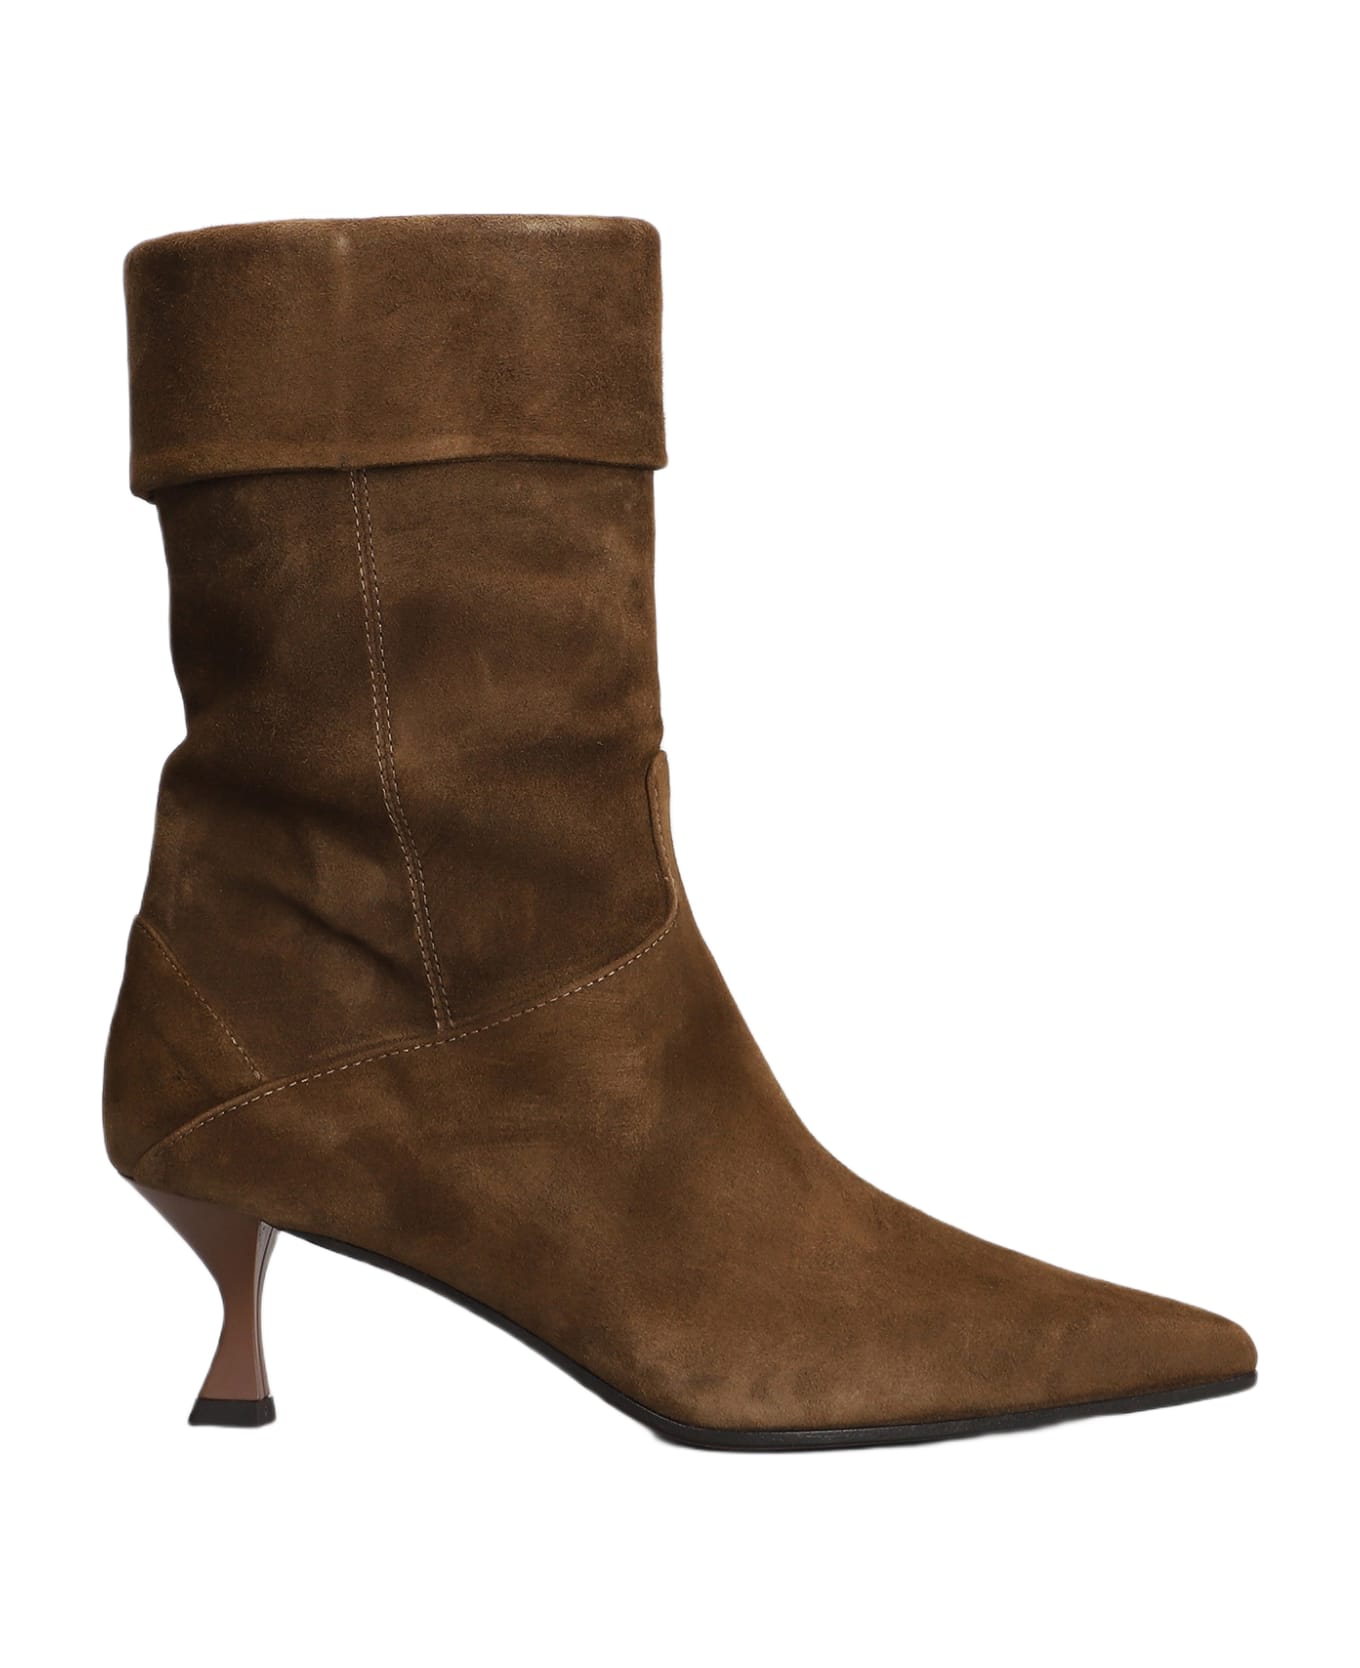 The Seller High Heels Ankle Boots In Brown Suede - brown